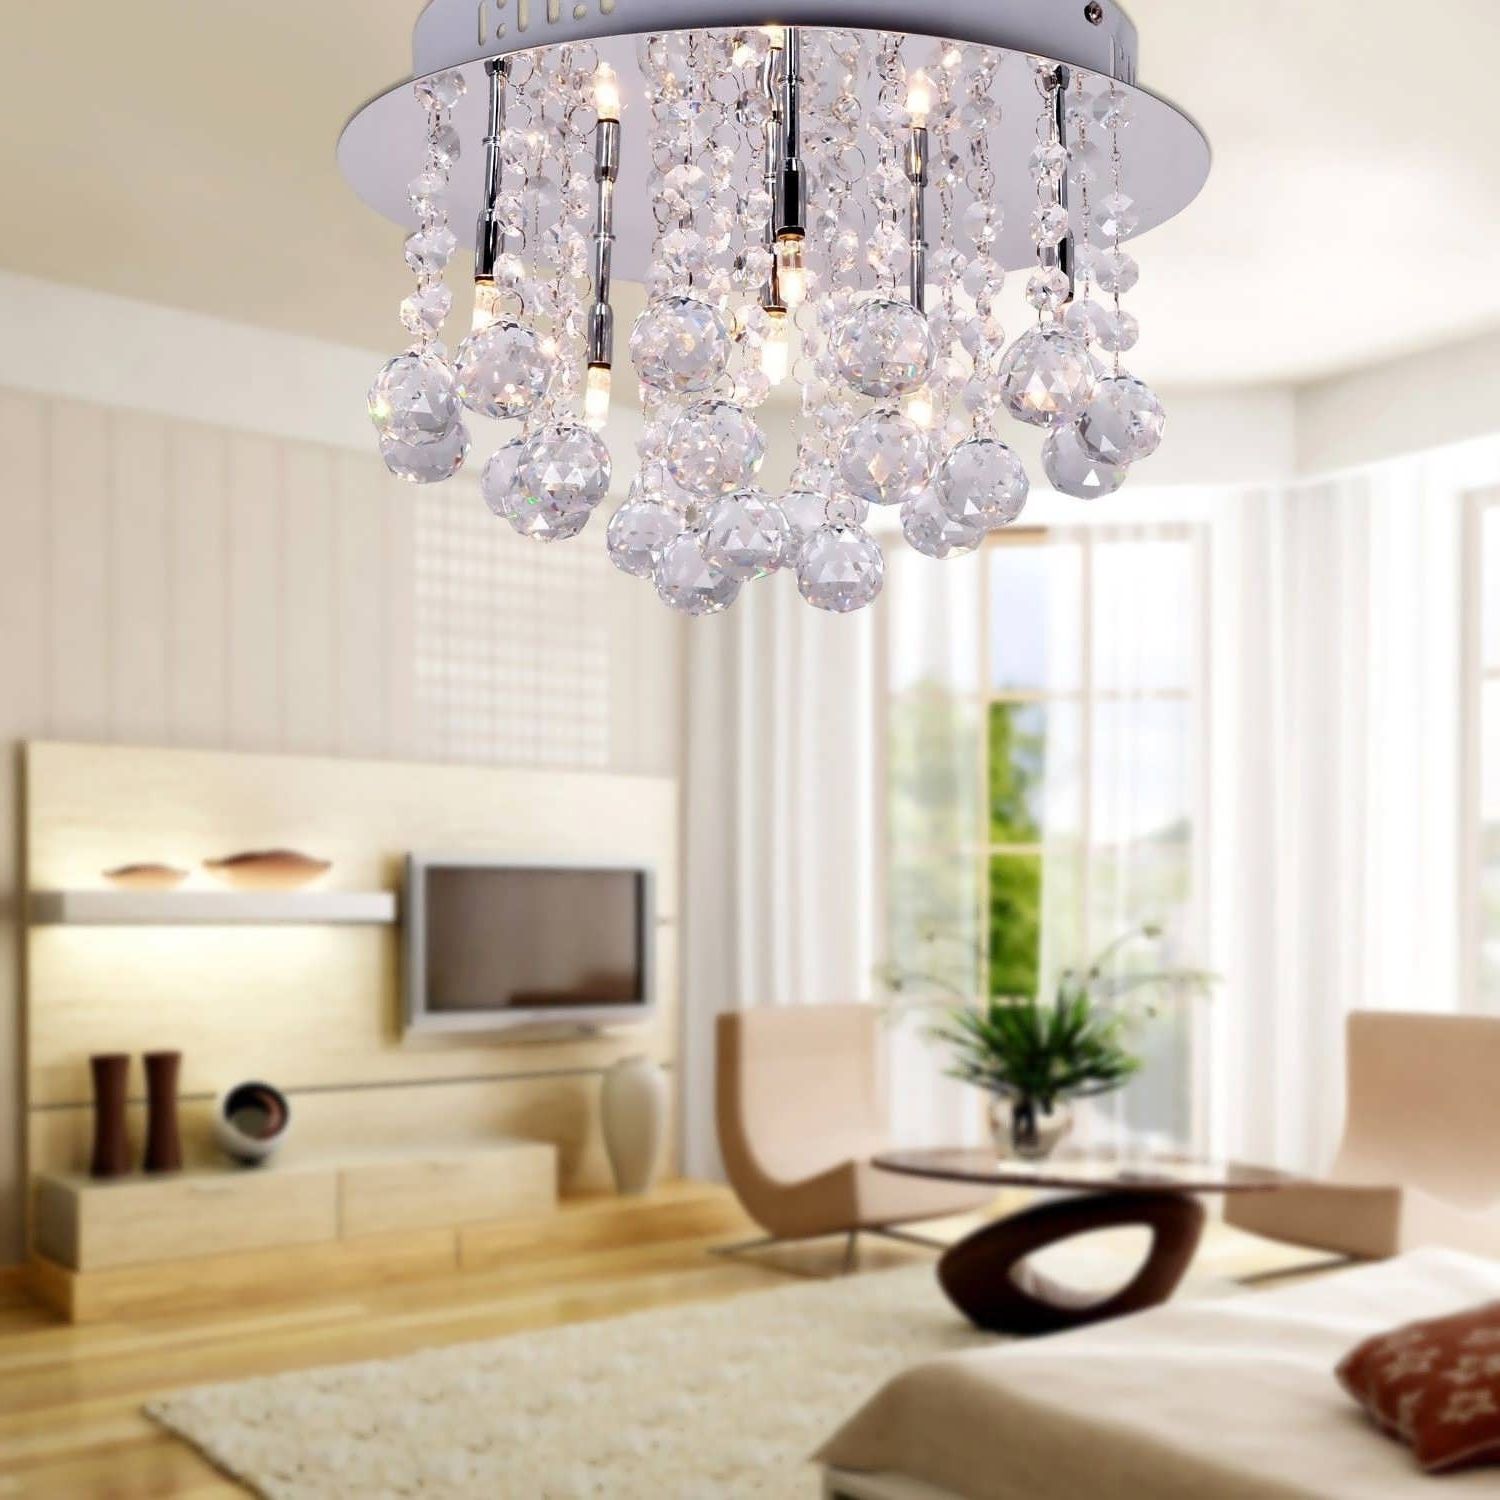 Preferred Restoration Hardware Chandelier Tags : Magnificent Restoration Pertaining To Florian Crystal Chandeliers (View 13 of 15)